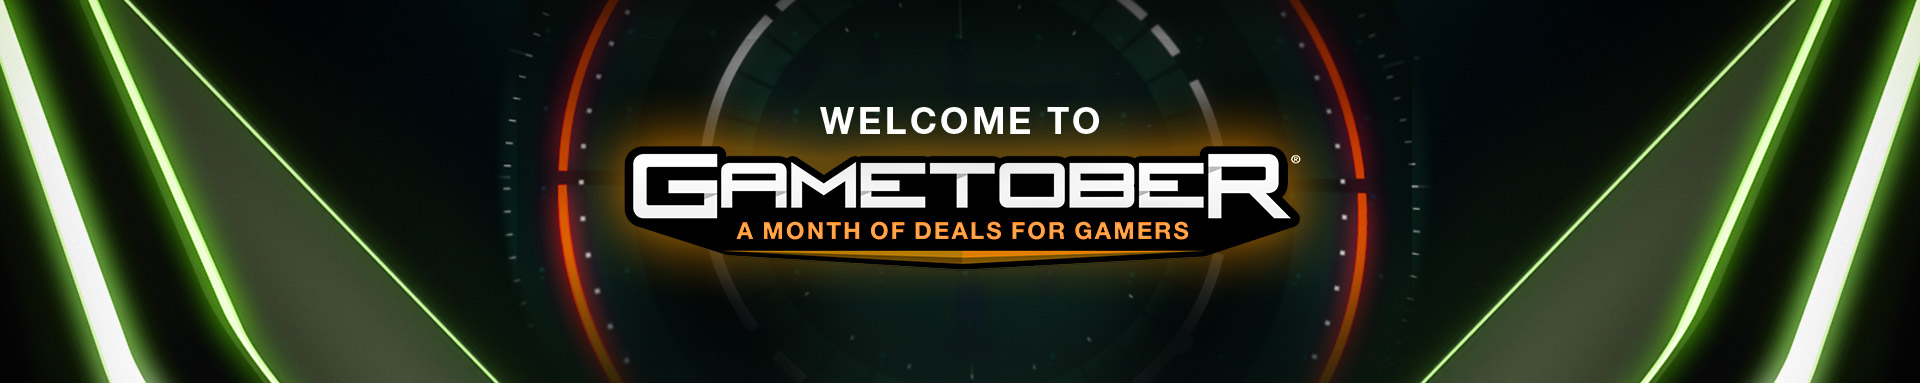 Welcome to Gametober